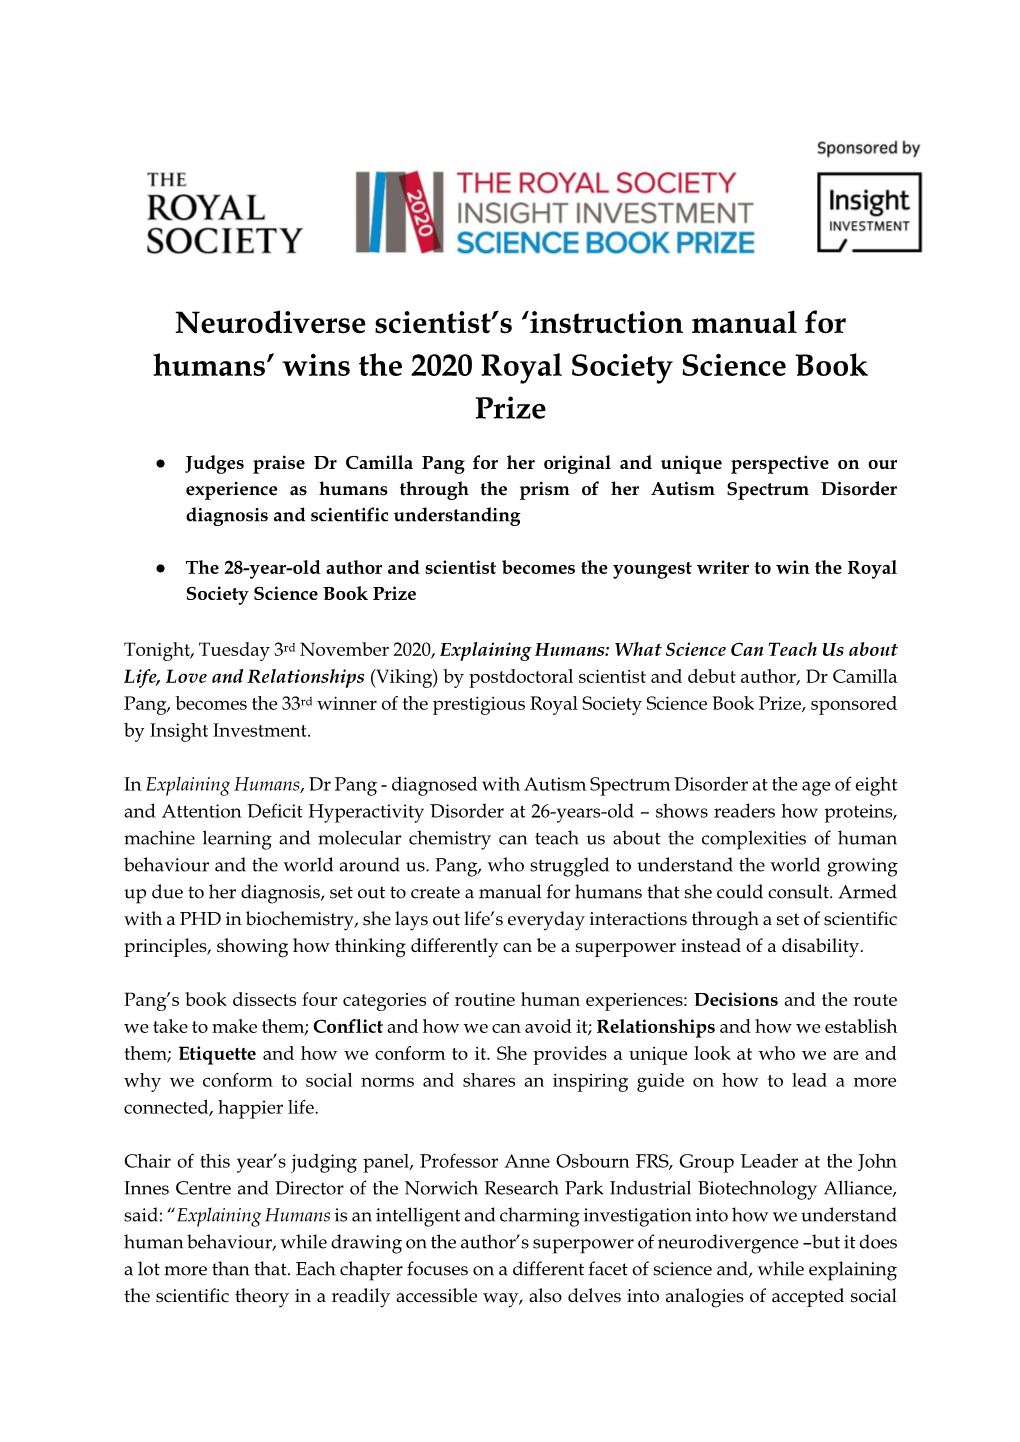 Wins the 2020 Royal Society Science Book Prize